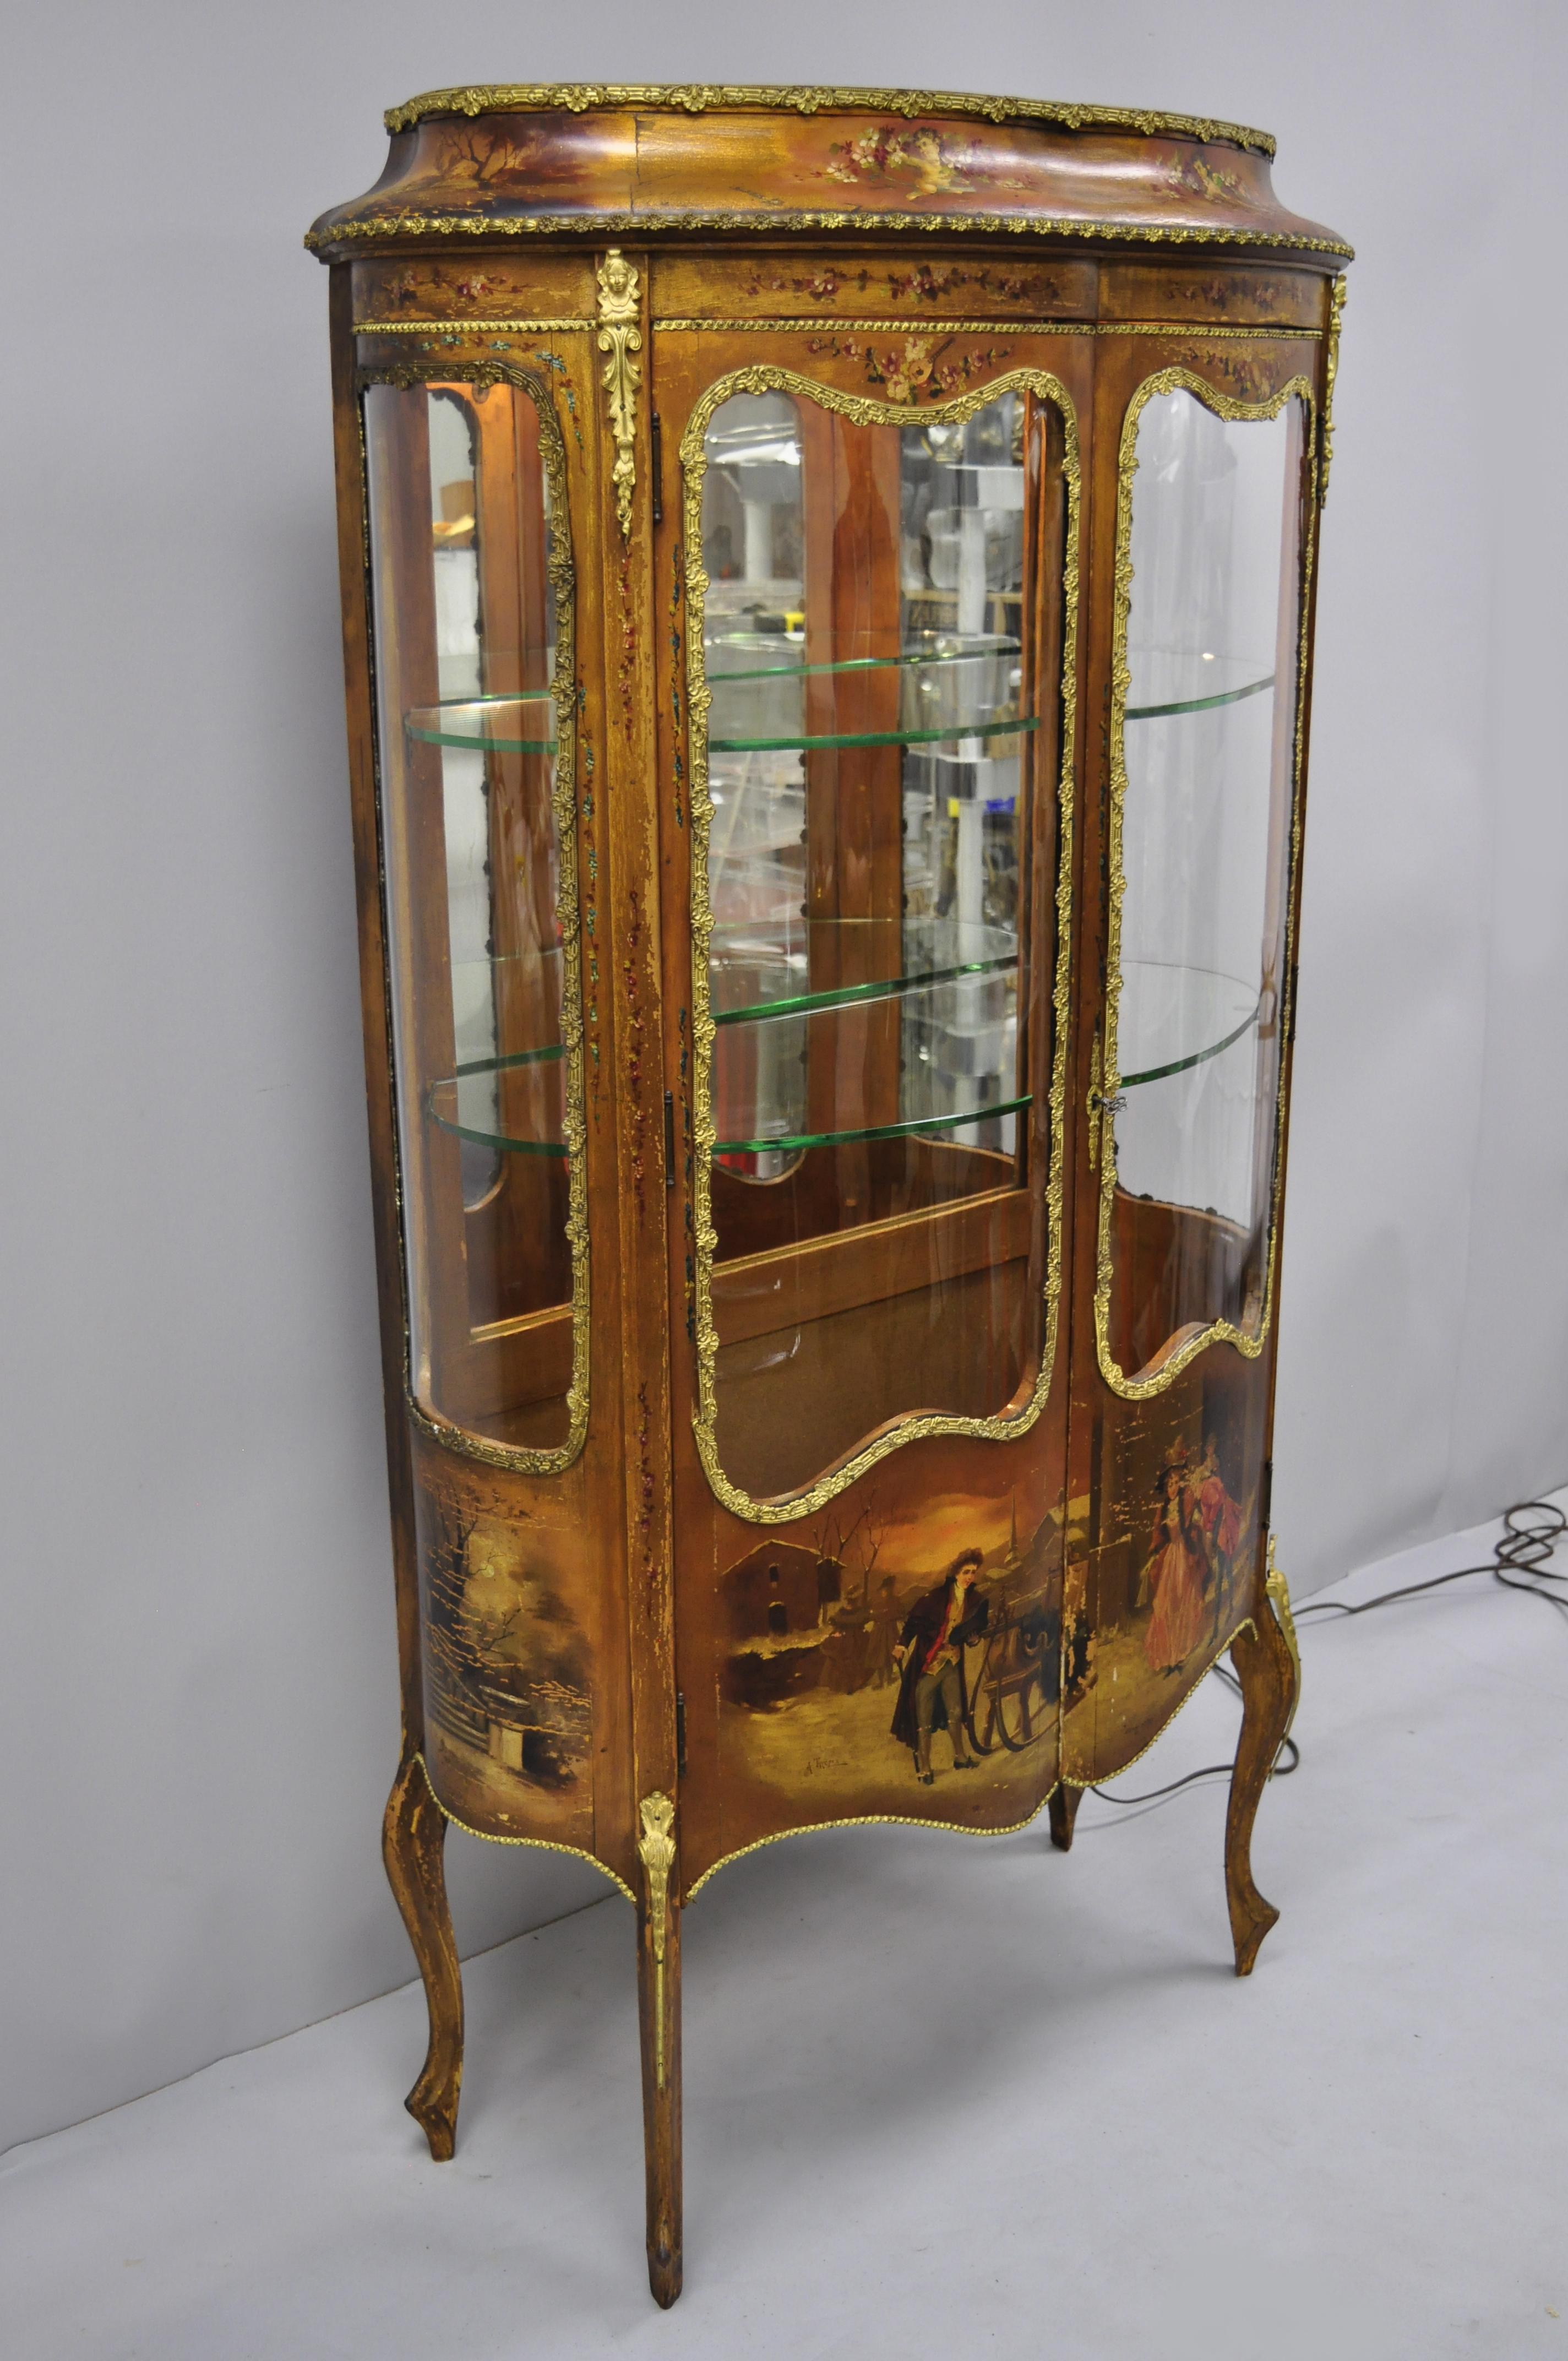 Antique French Louis XV style hand painted Vernis Martin Vitrine China cabinet. Item features 4 curved glass panels, bronze & brass ormolu, hand painted scenes and floral detail, mirror back, distressed finish, lighted interior, 2 swing doors,